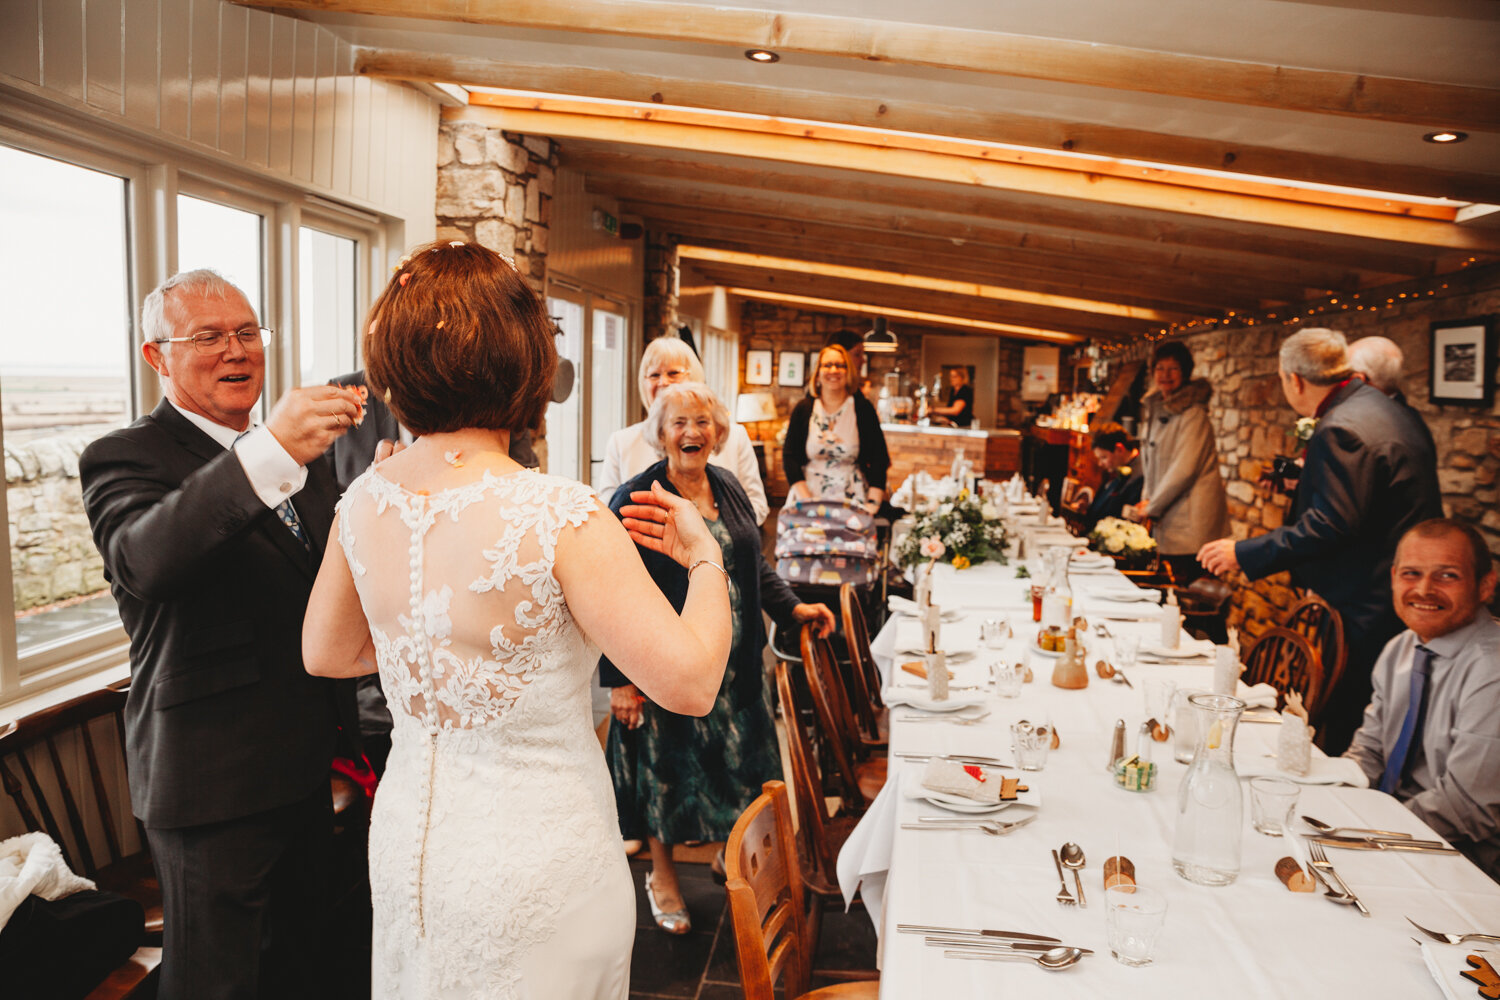 PICTORIAL_wedding-lindisfarne-castle-northumberland-photographer-mead-locally-sourced-holy-island-24.jpg